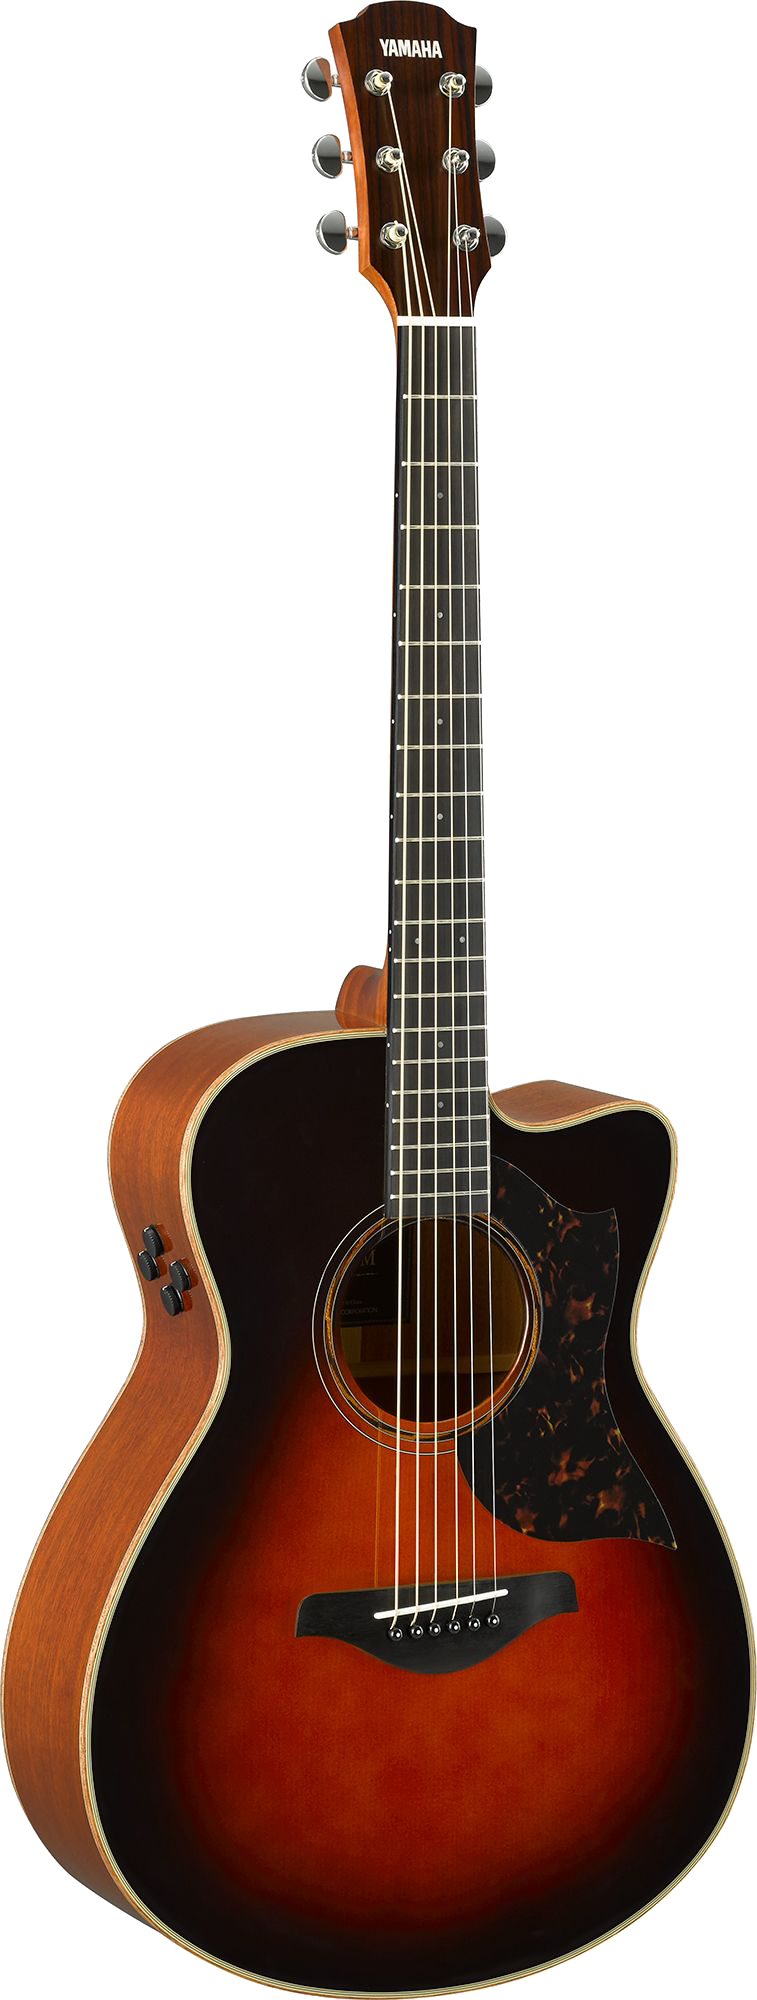 Full front angle of Open Box Yamaha AC3M ARE Concert Cutaway Tobacco Brown Sunburst.